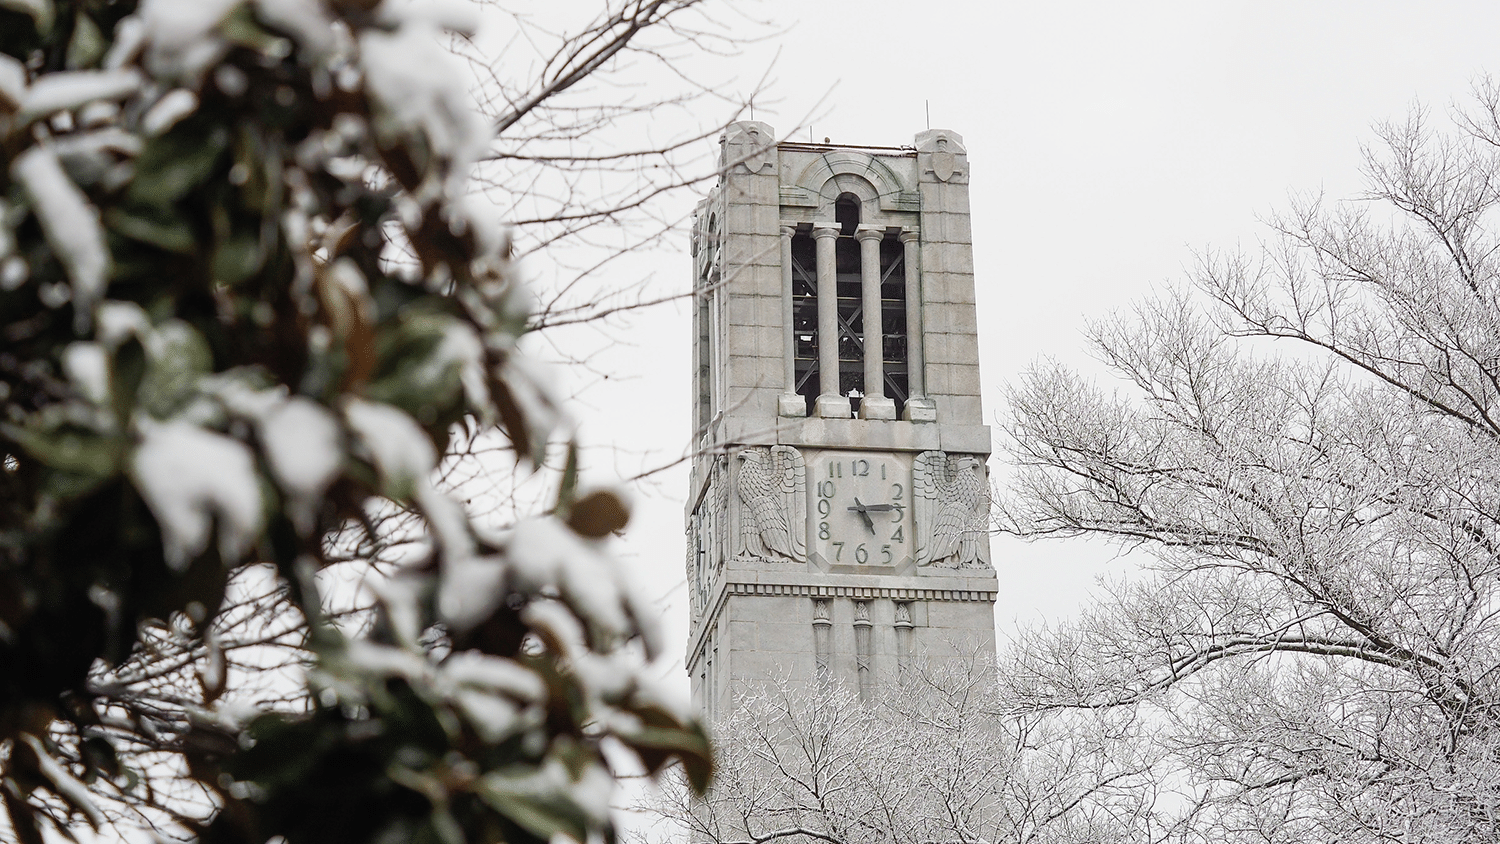 The Memorial Belltower on a snowy day.